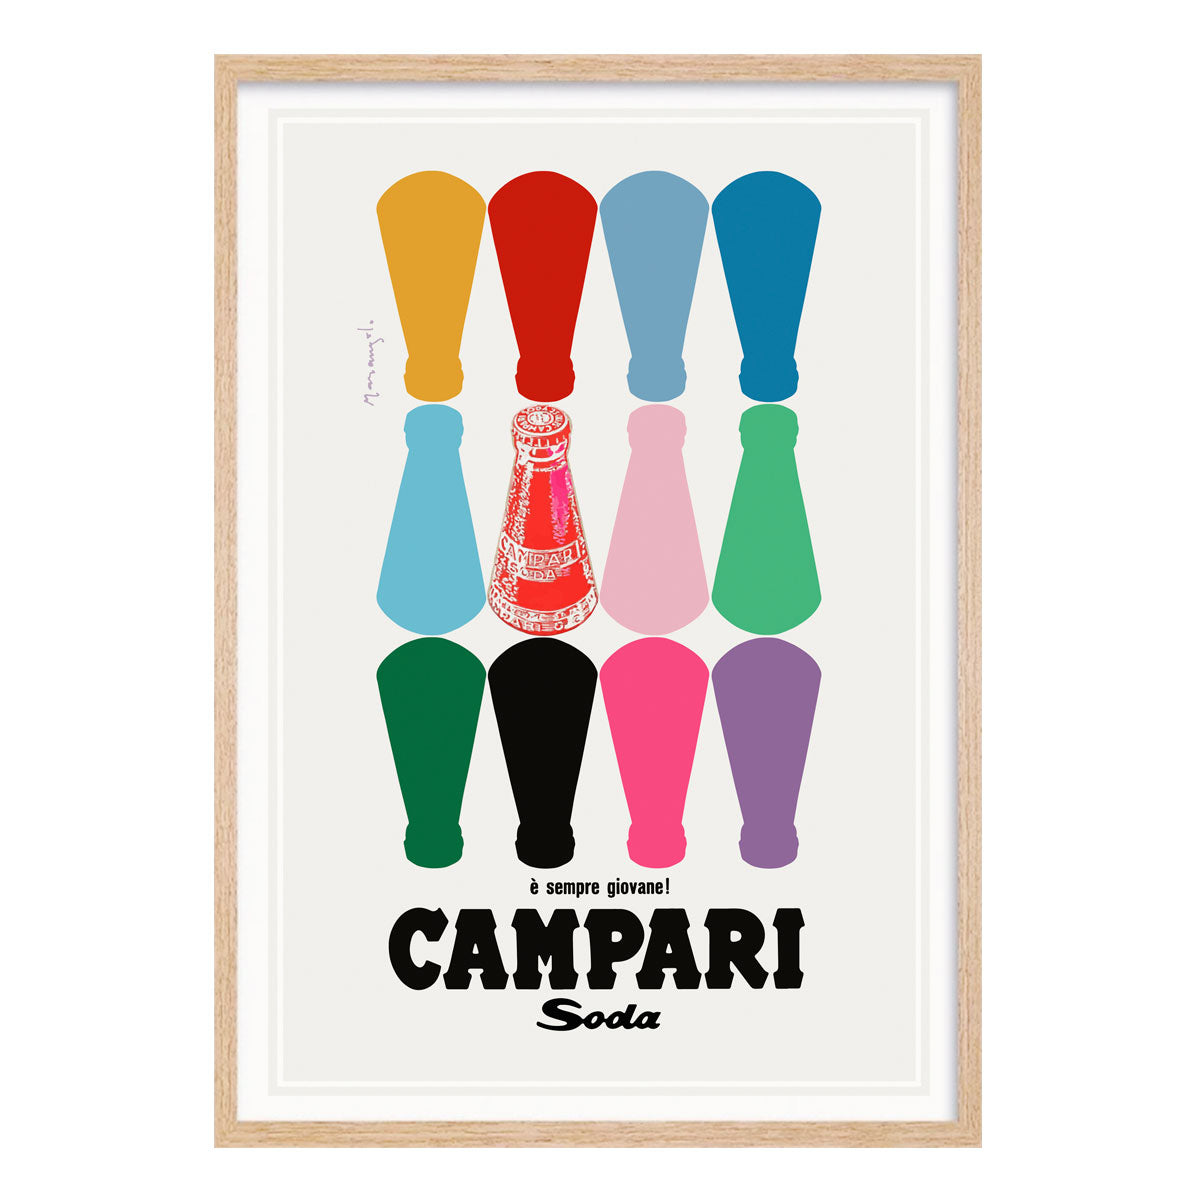 Campari Soda #2 vintage retro advertising poster in oak frame from Places We Luv